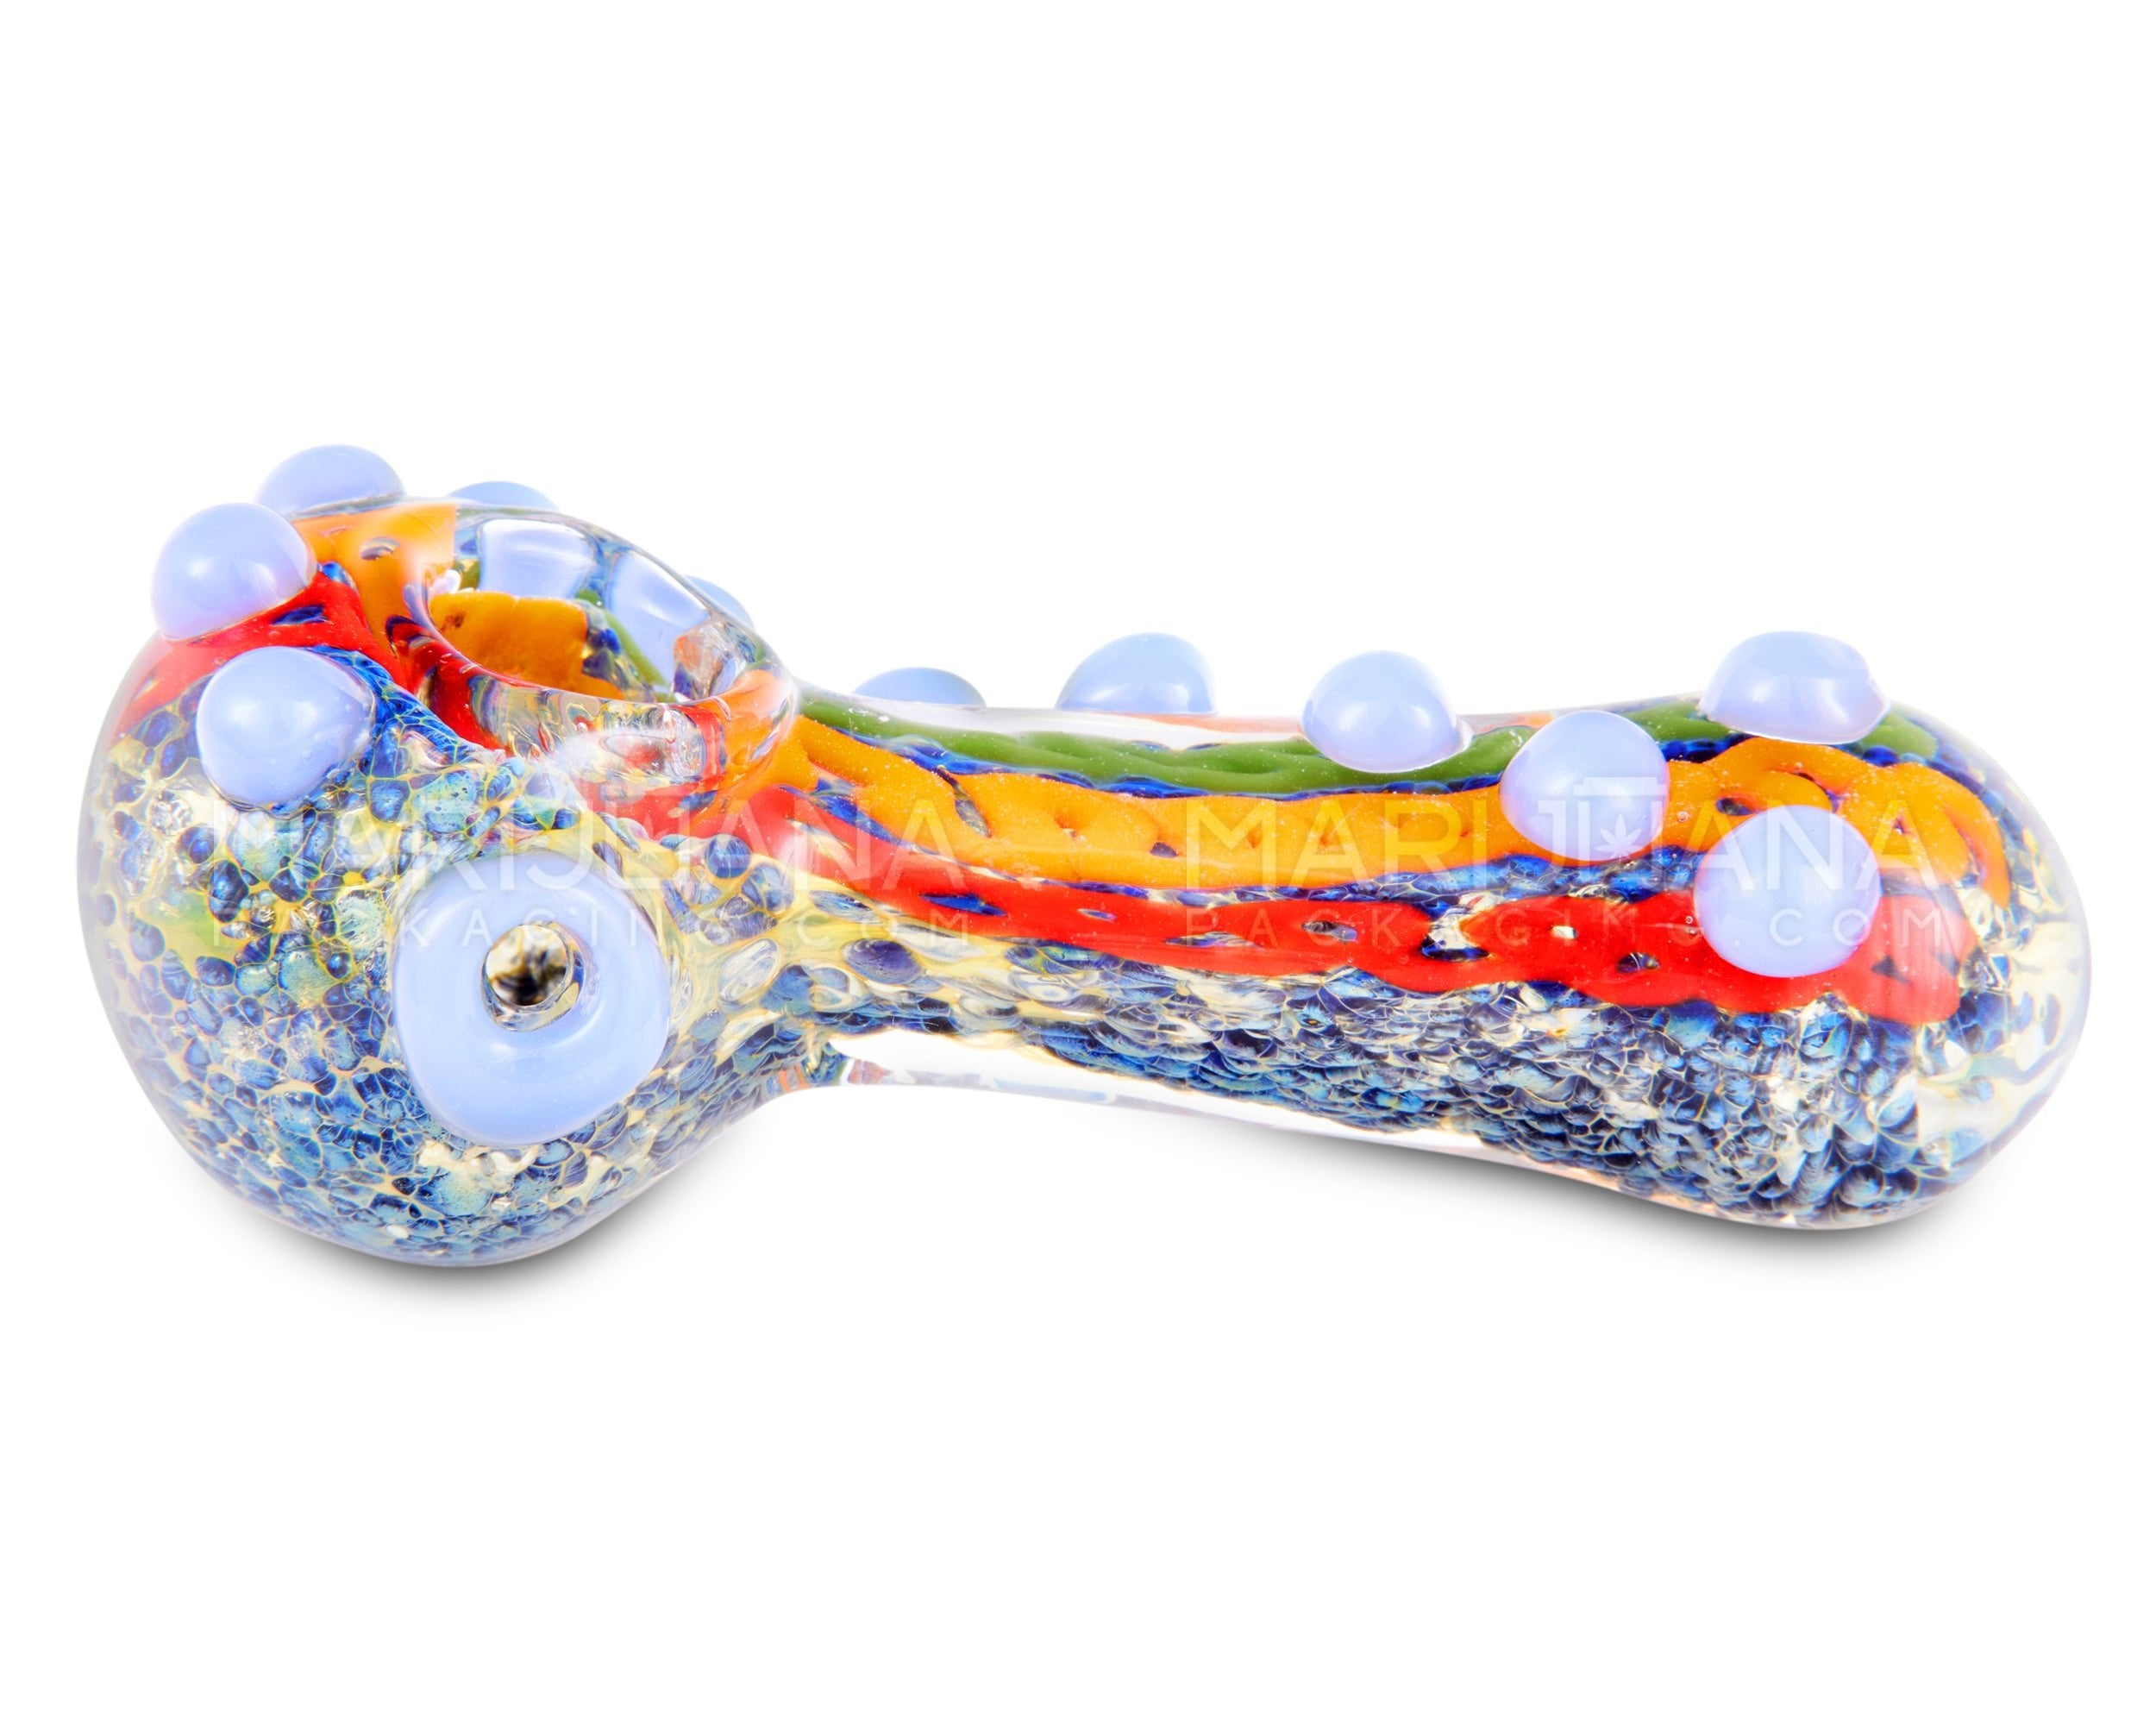 Frit Spoon Hand Pipe w/ Rasta Stripes & Multi Knockers | 4.5in Long - Glass - Assorted - 5